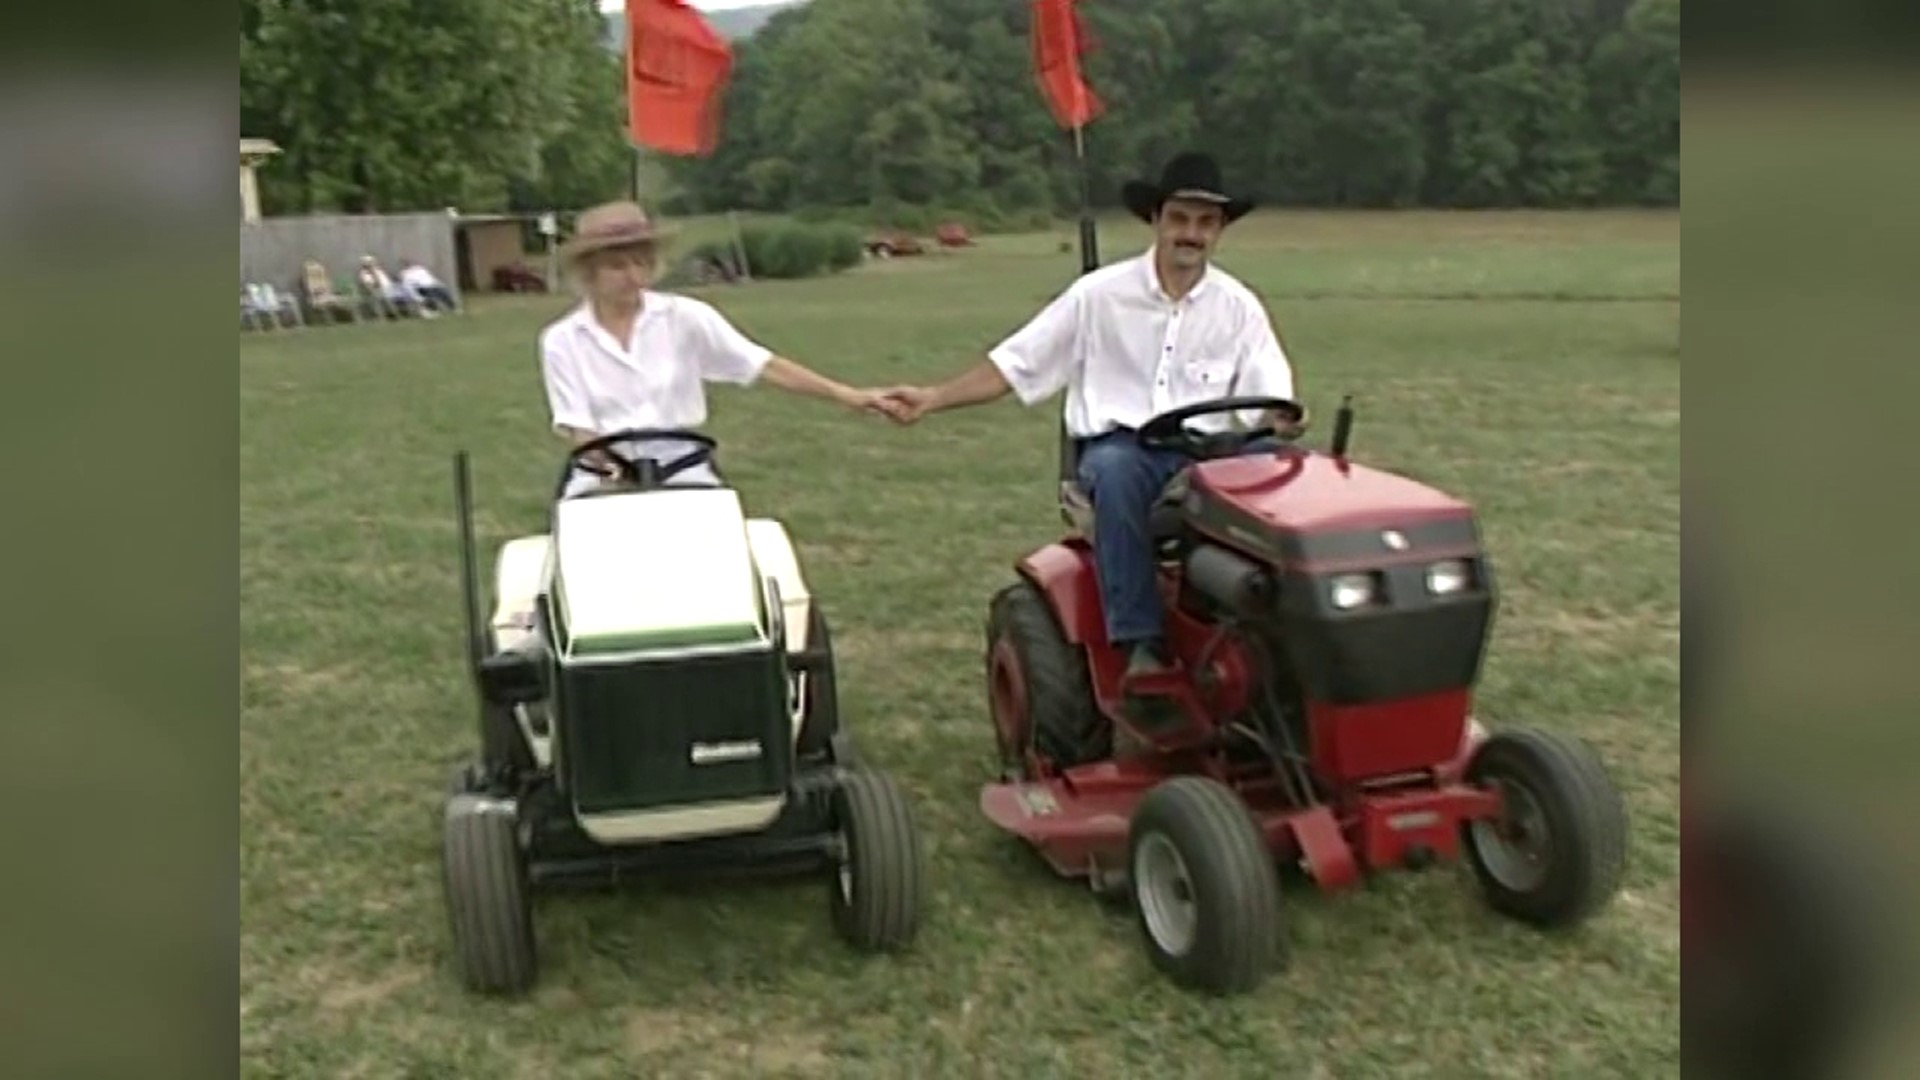 Mike Stevens takes us back to 1997 with the Lawn Tractor Square Dance Team of the East Lycoming Farm and Heritage Association.